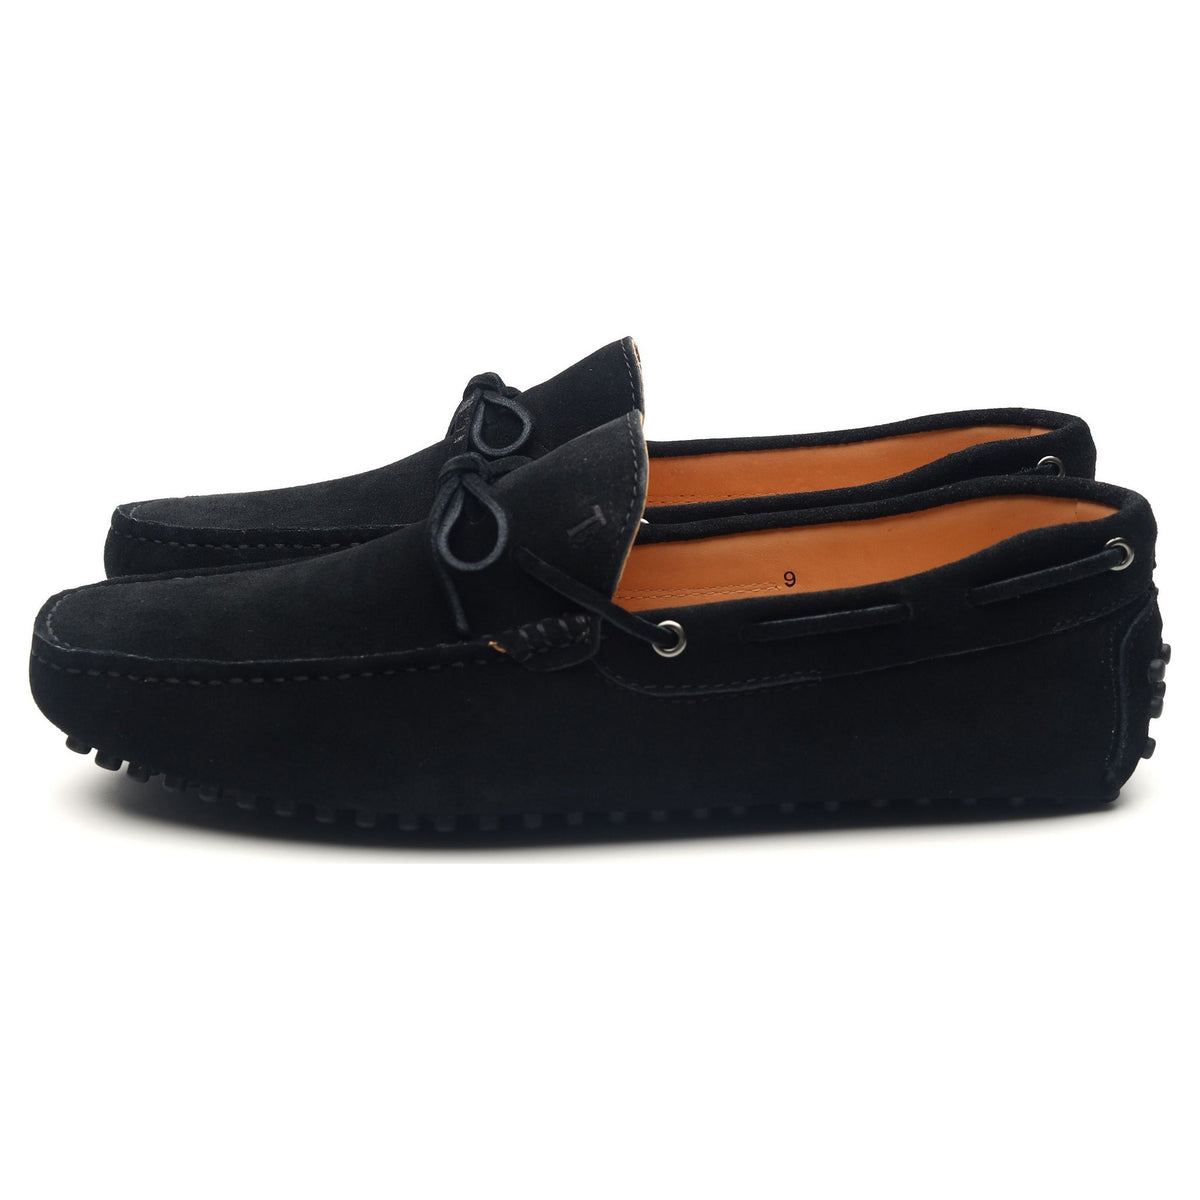 Gommino Black Suede Driving Loafers UK 9